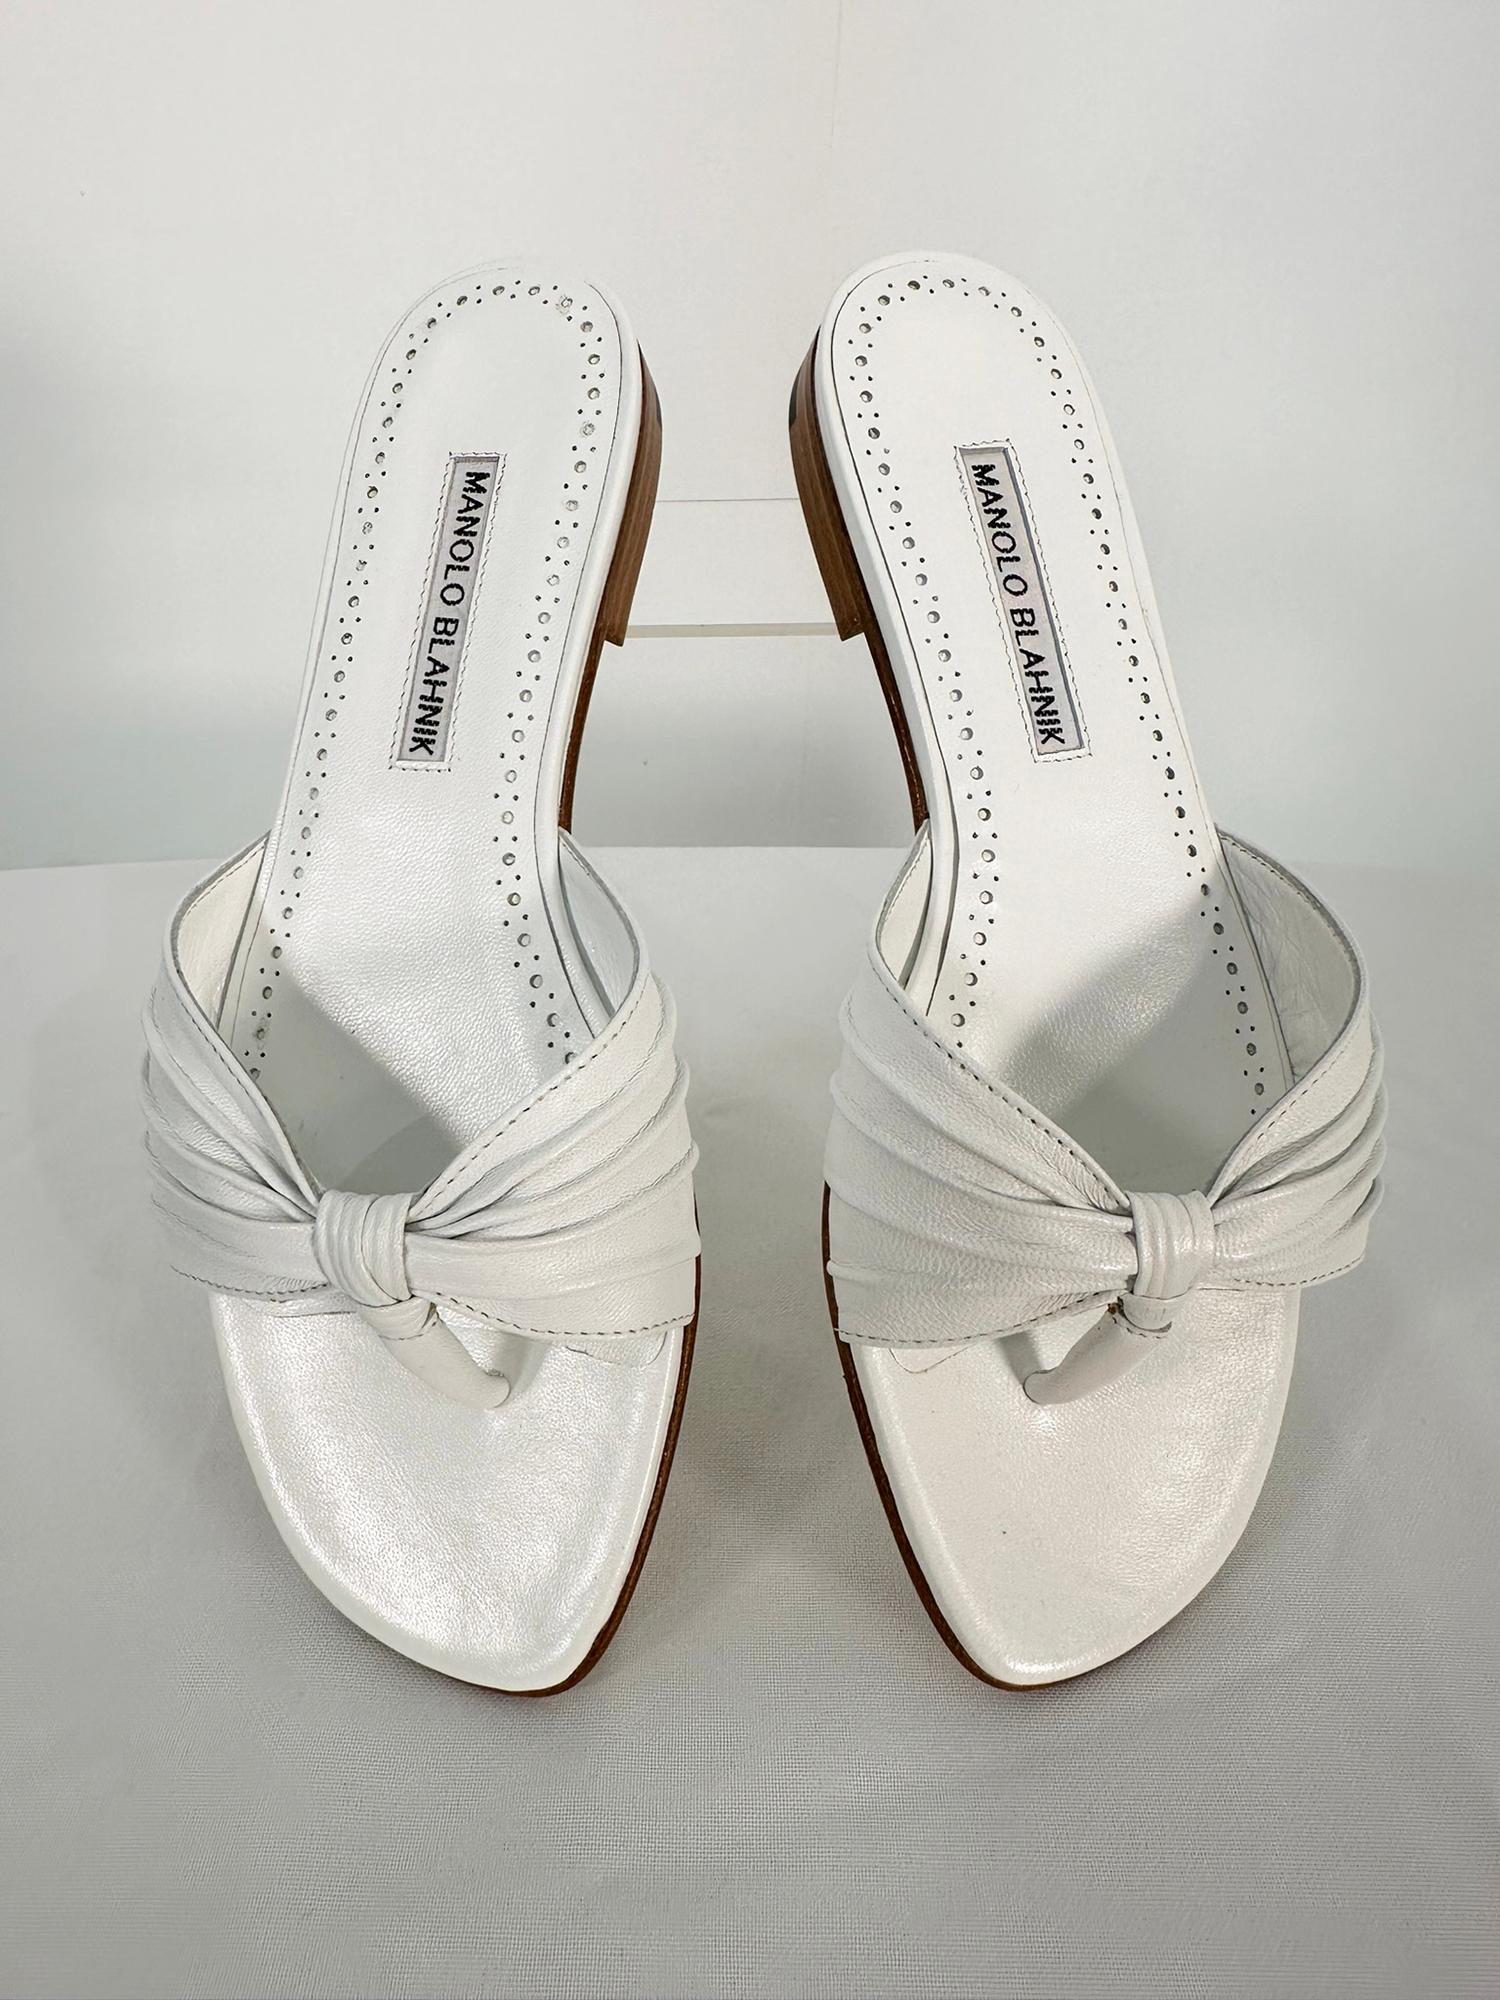 Manolo Blahnik,  Bernaperf, white nappa leather thong slide sandals. Unworn in the box with protector bags. 37. 